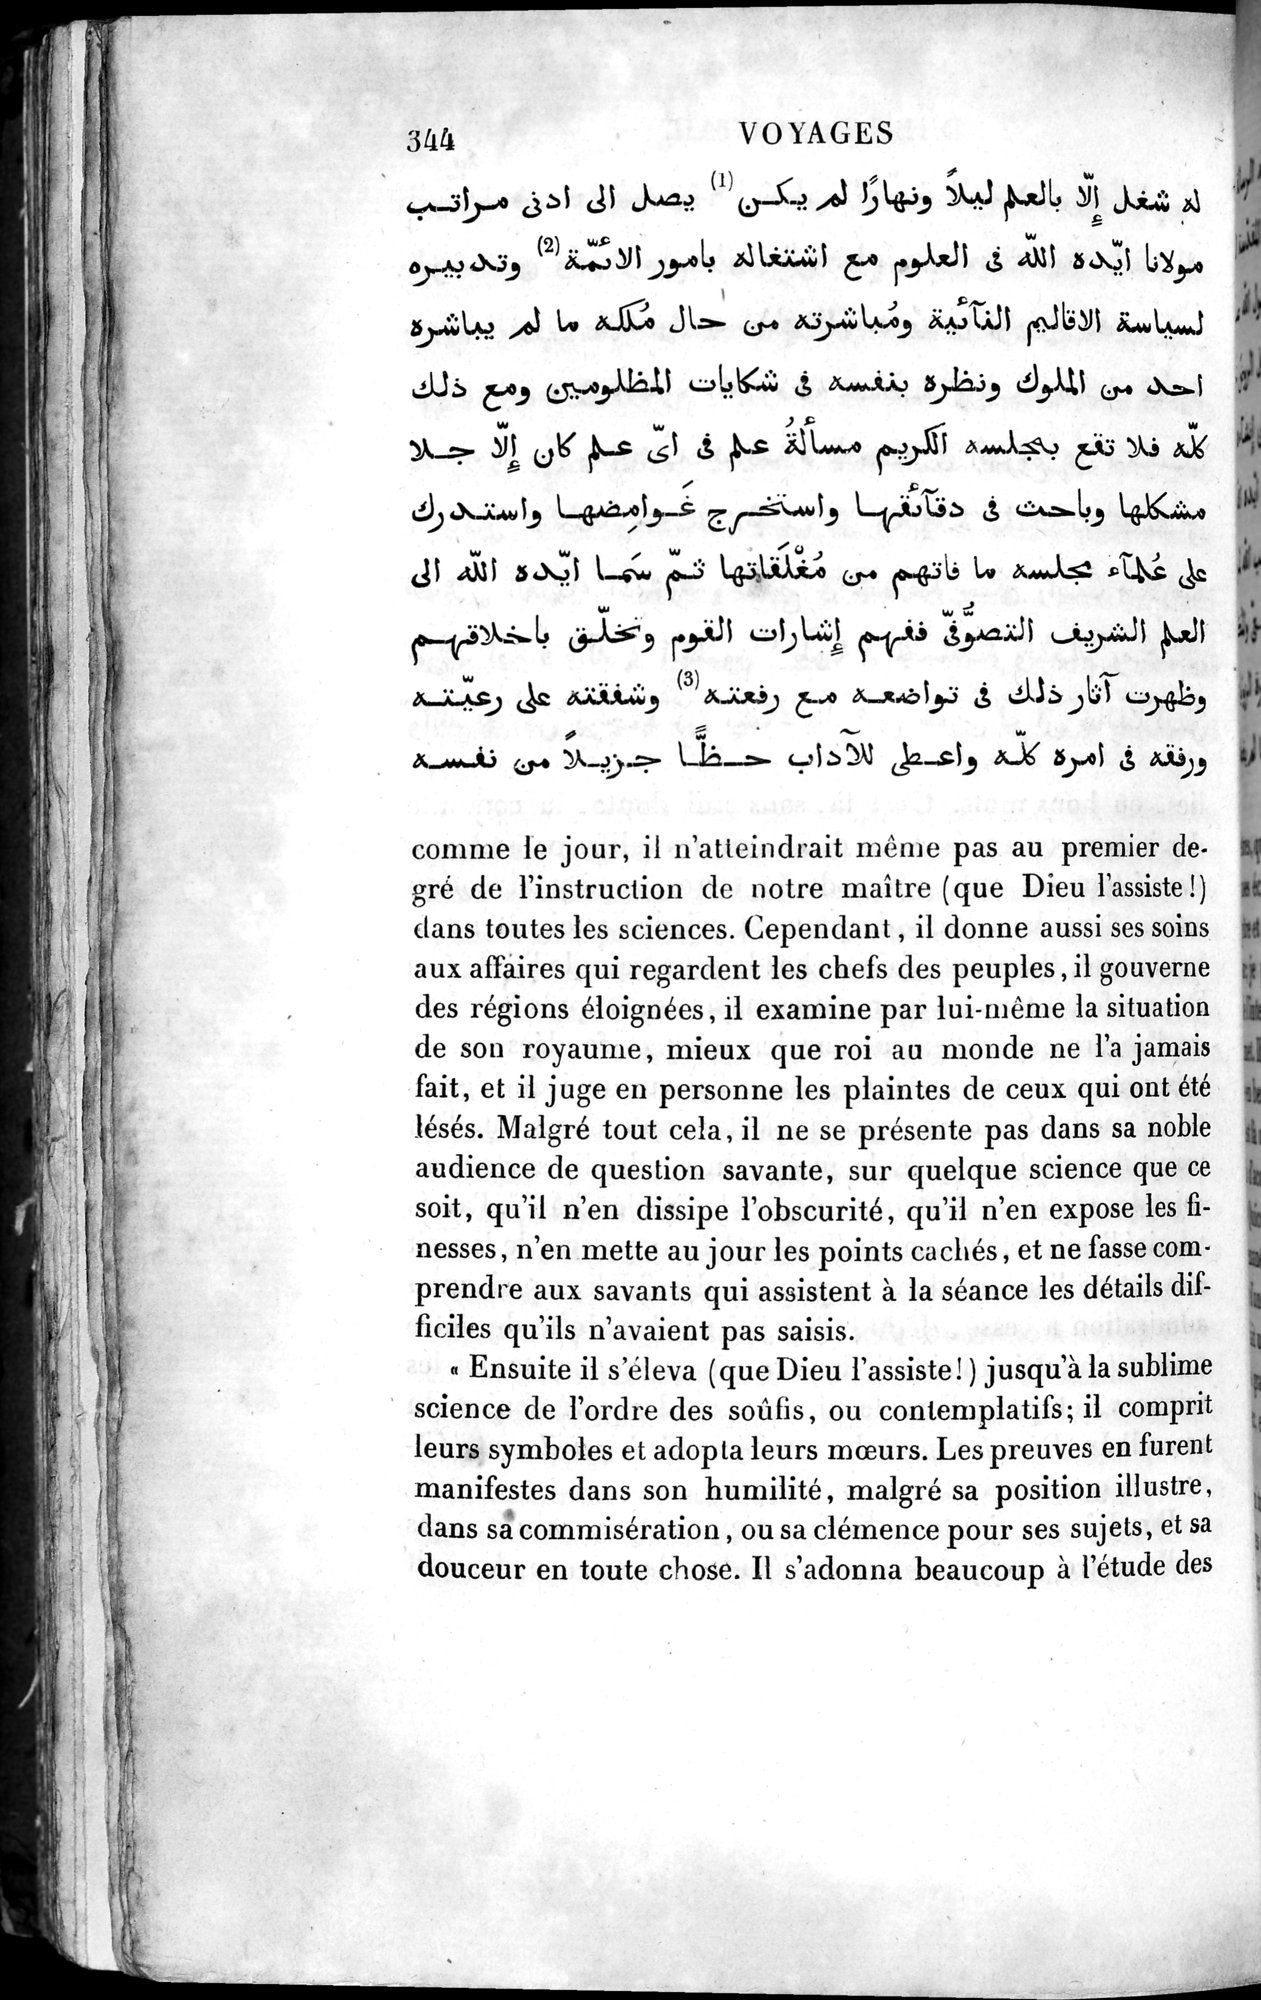 Voyages d'Ibn Batoutah : vol.4 / Page 356 (Grayscale High Resolution Image)